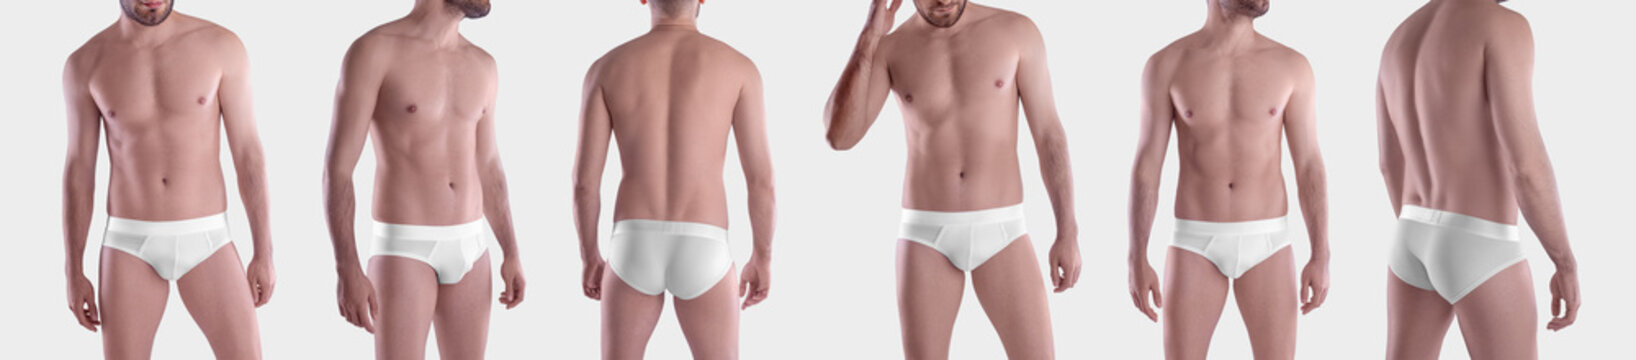 White brief panties mockup on a shaved guy, shorts close-up, isolated on background, front, back view.